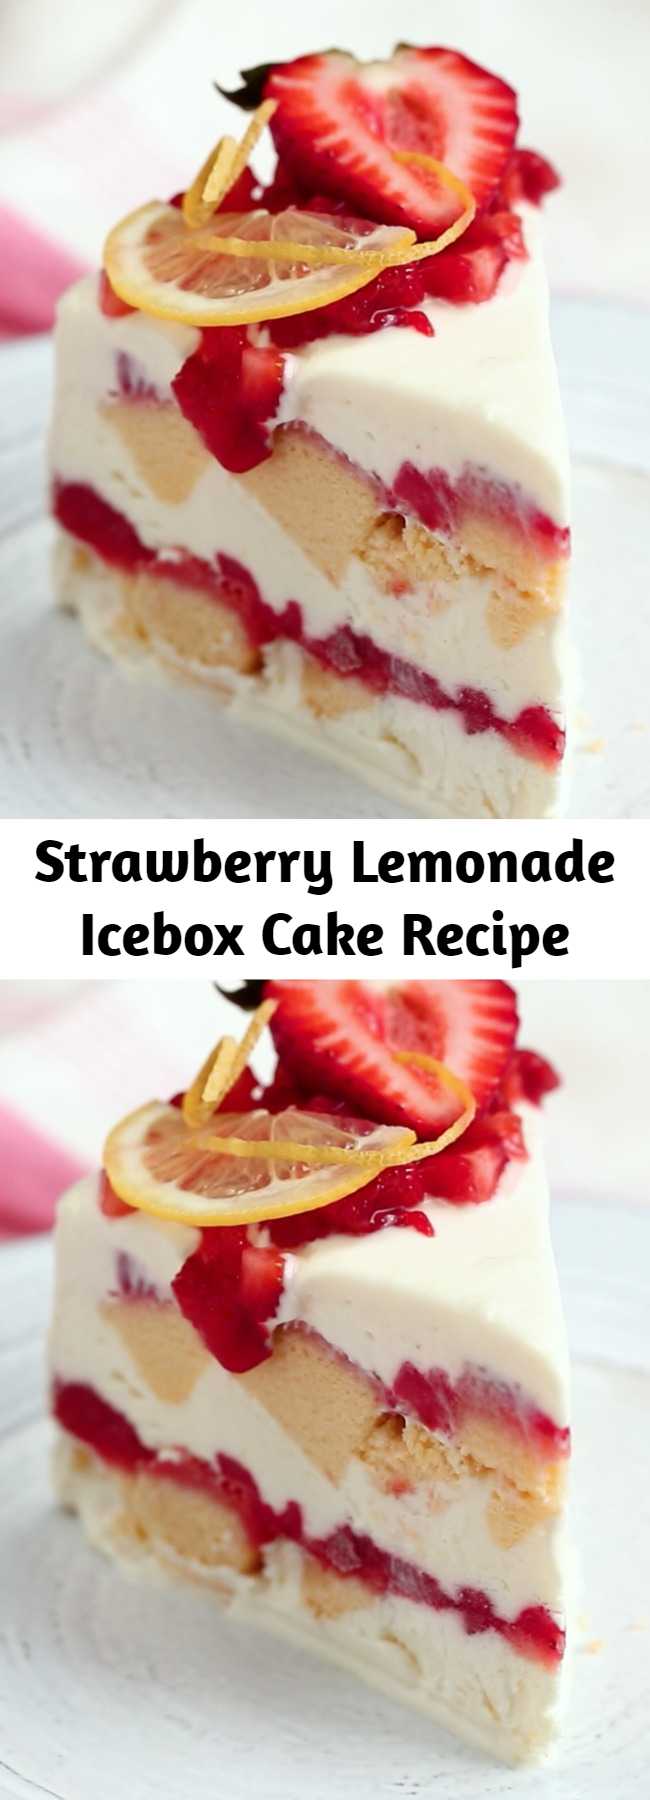 Strawberry Lemonade Icebox Cake Recipe - Layers of pound cake, strawberries and frozen cream form the perfect treat for the sunniest of afternoons.